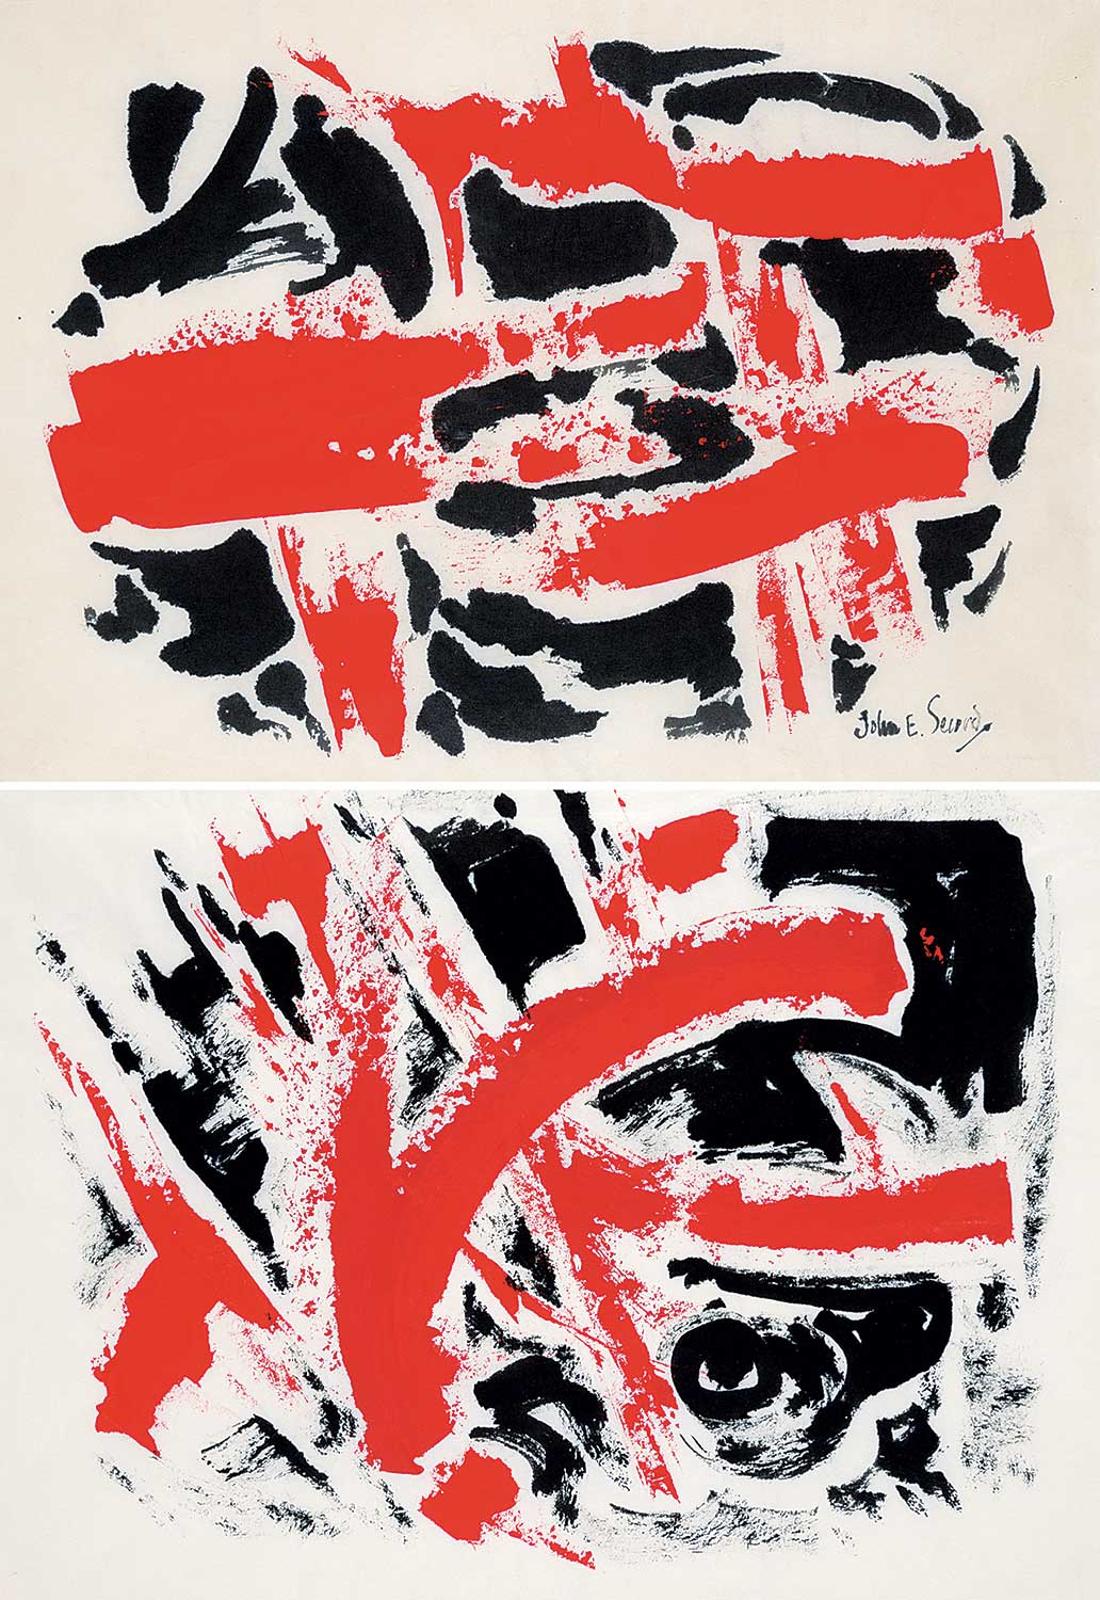 John Everett Secord (1908-1996) - Untitled - Red and Black Abstract